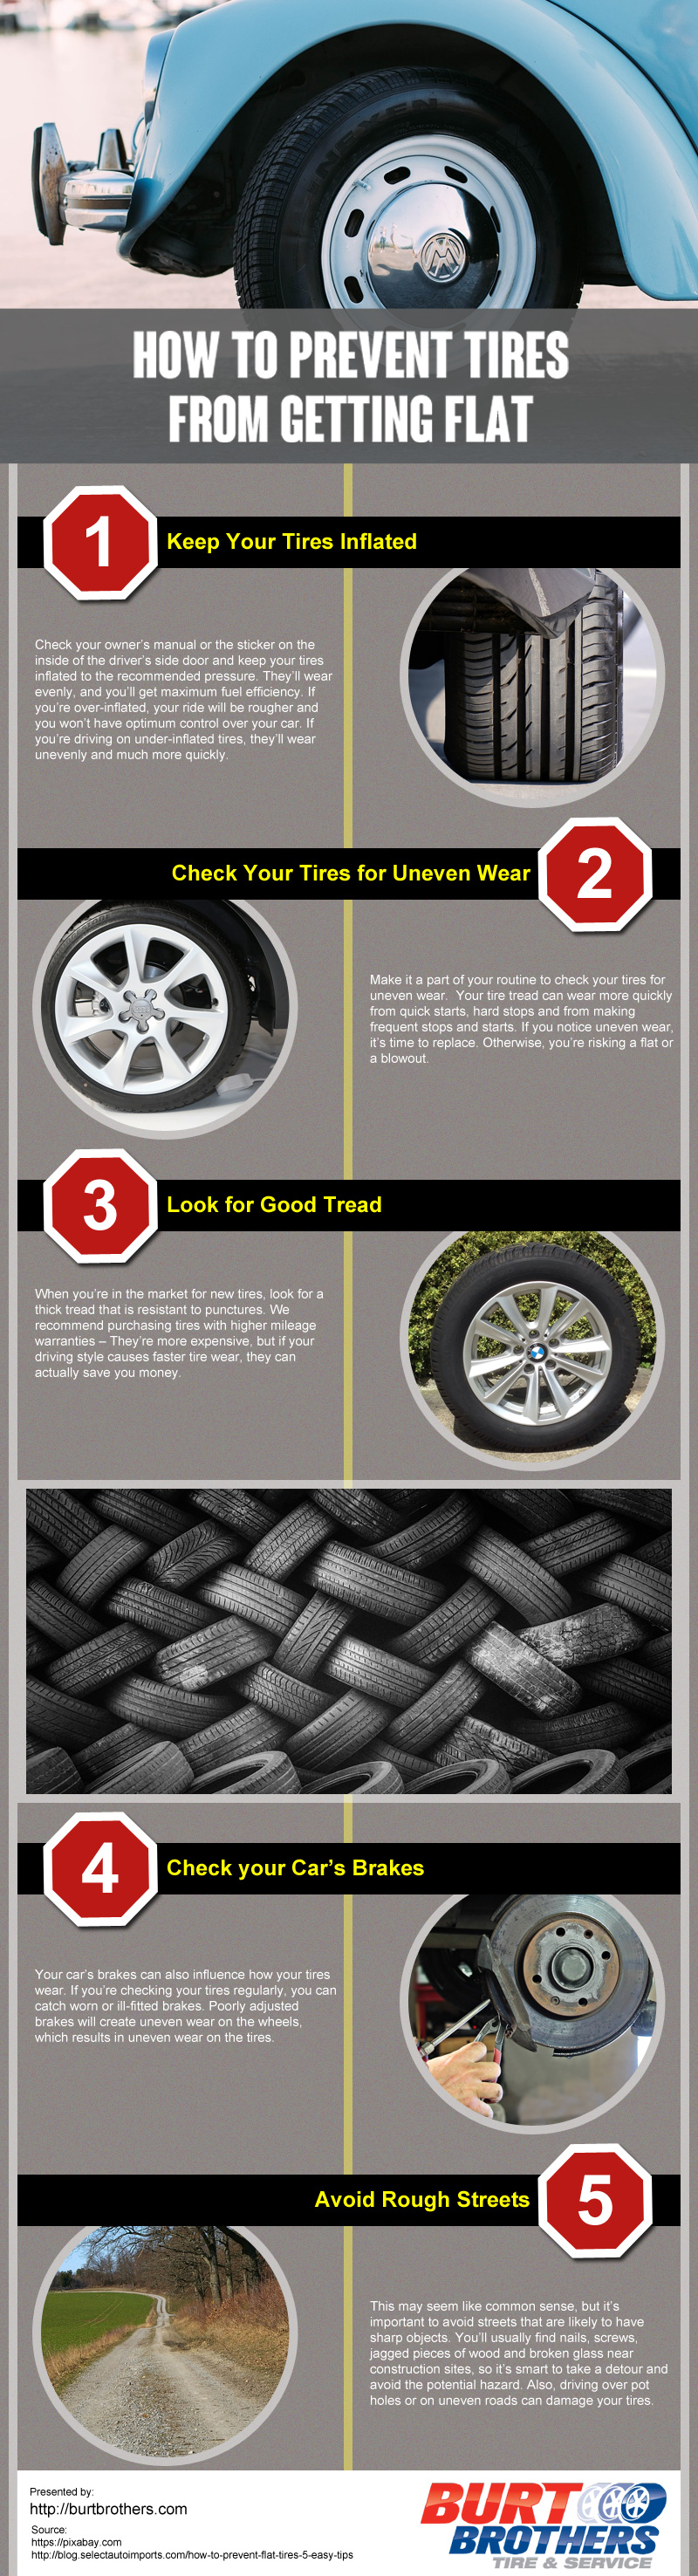 How to Prevent Tires From Getting Flat